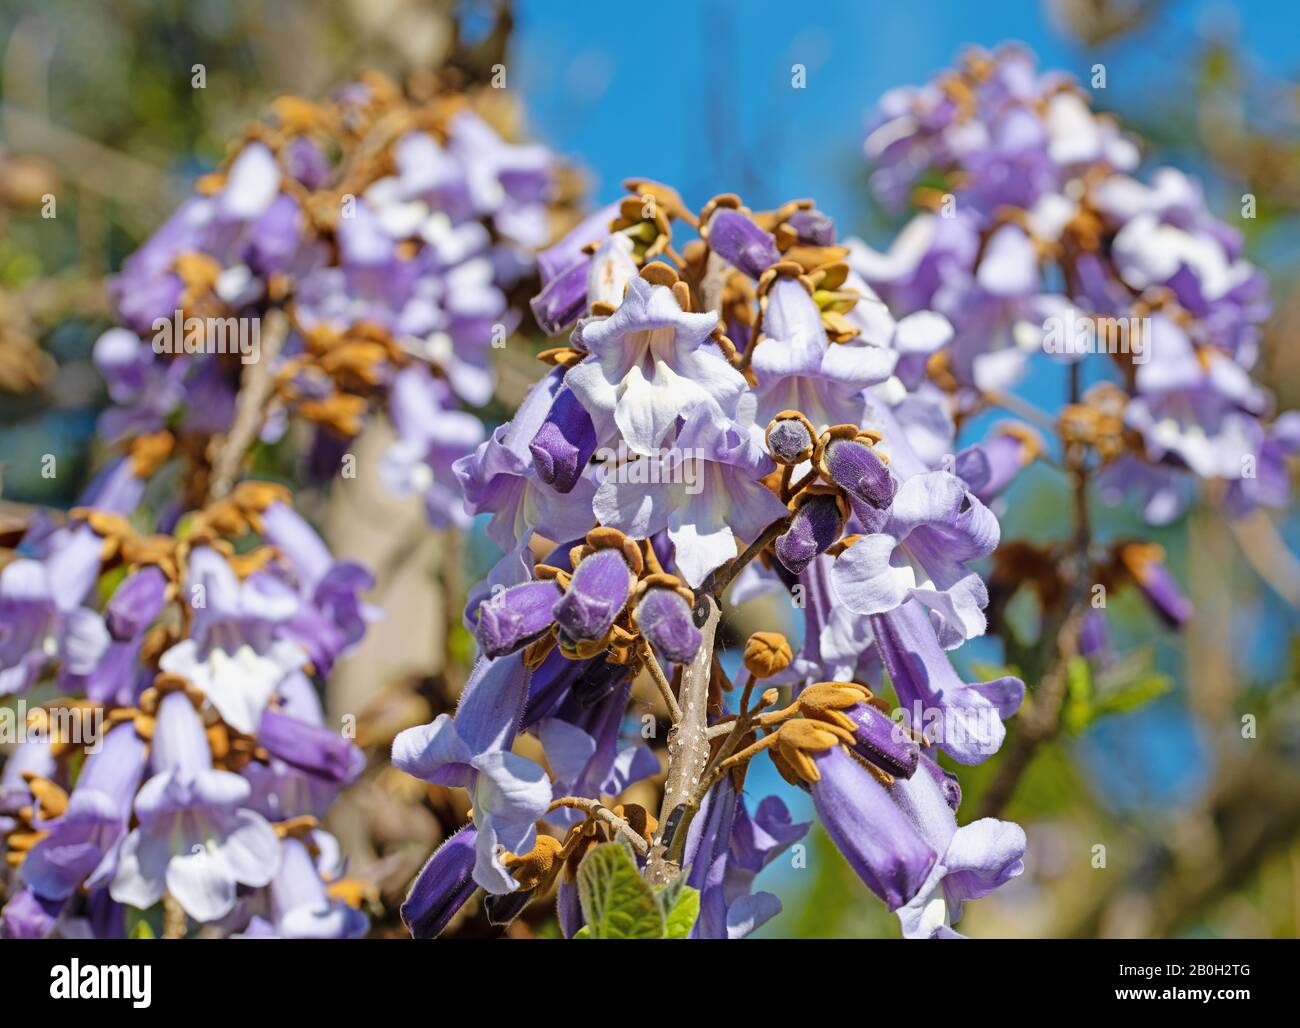 Paulownia tomentosa trees in flower, spring blossom Stock Photo - Alamy